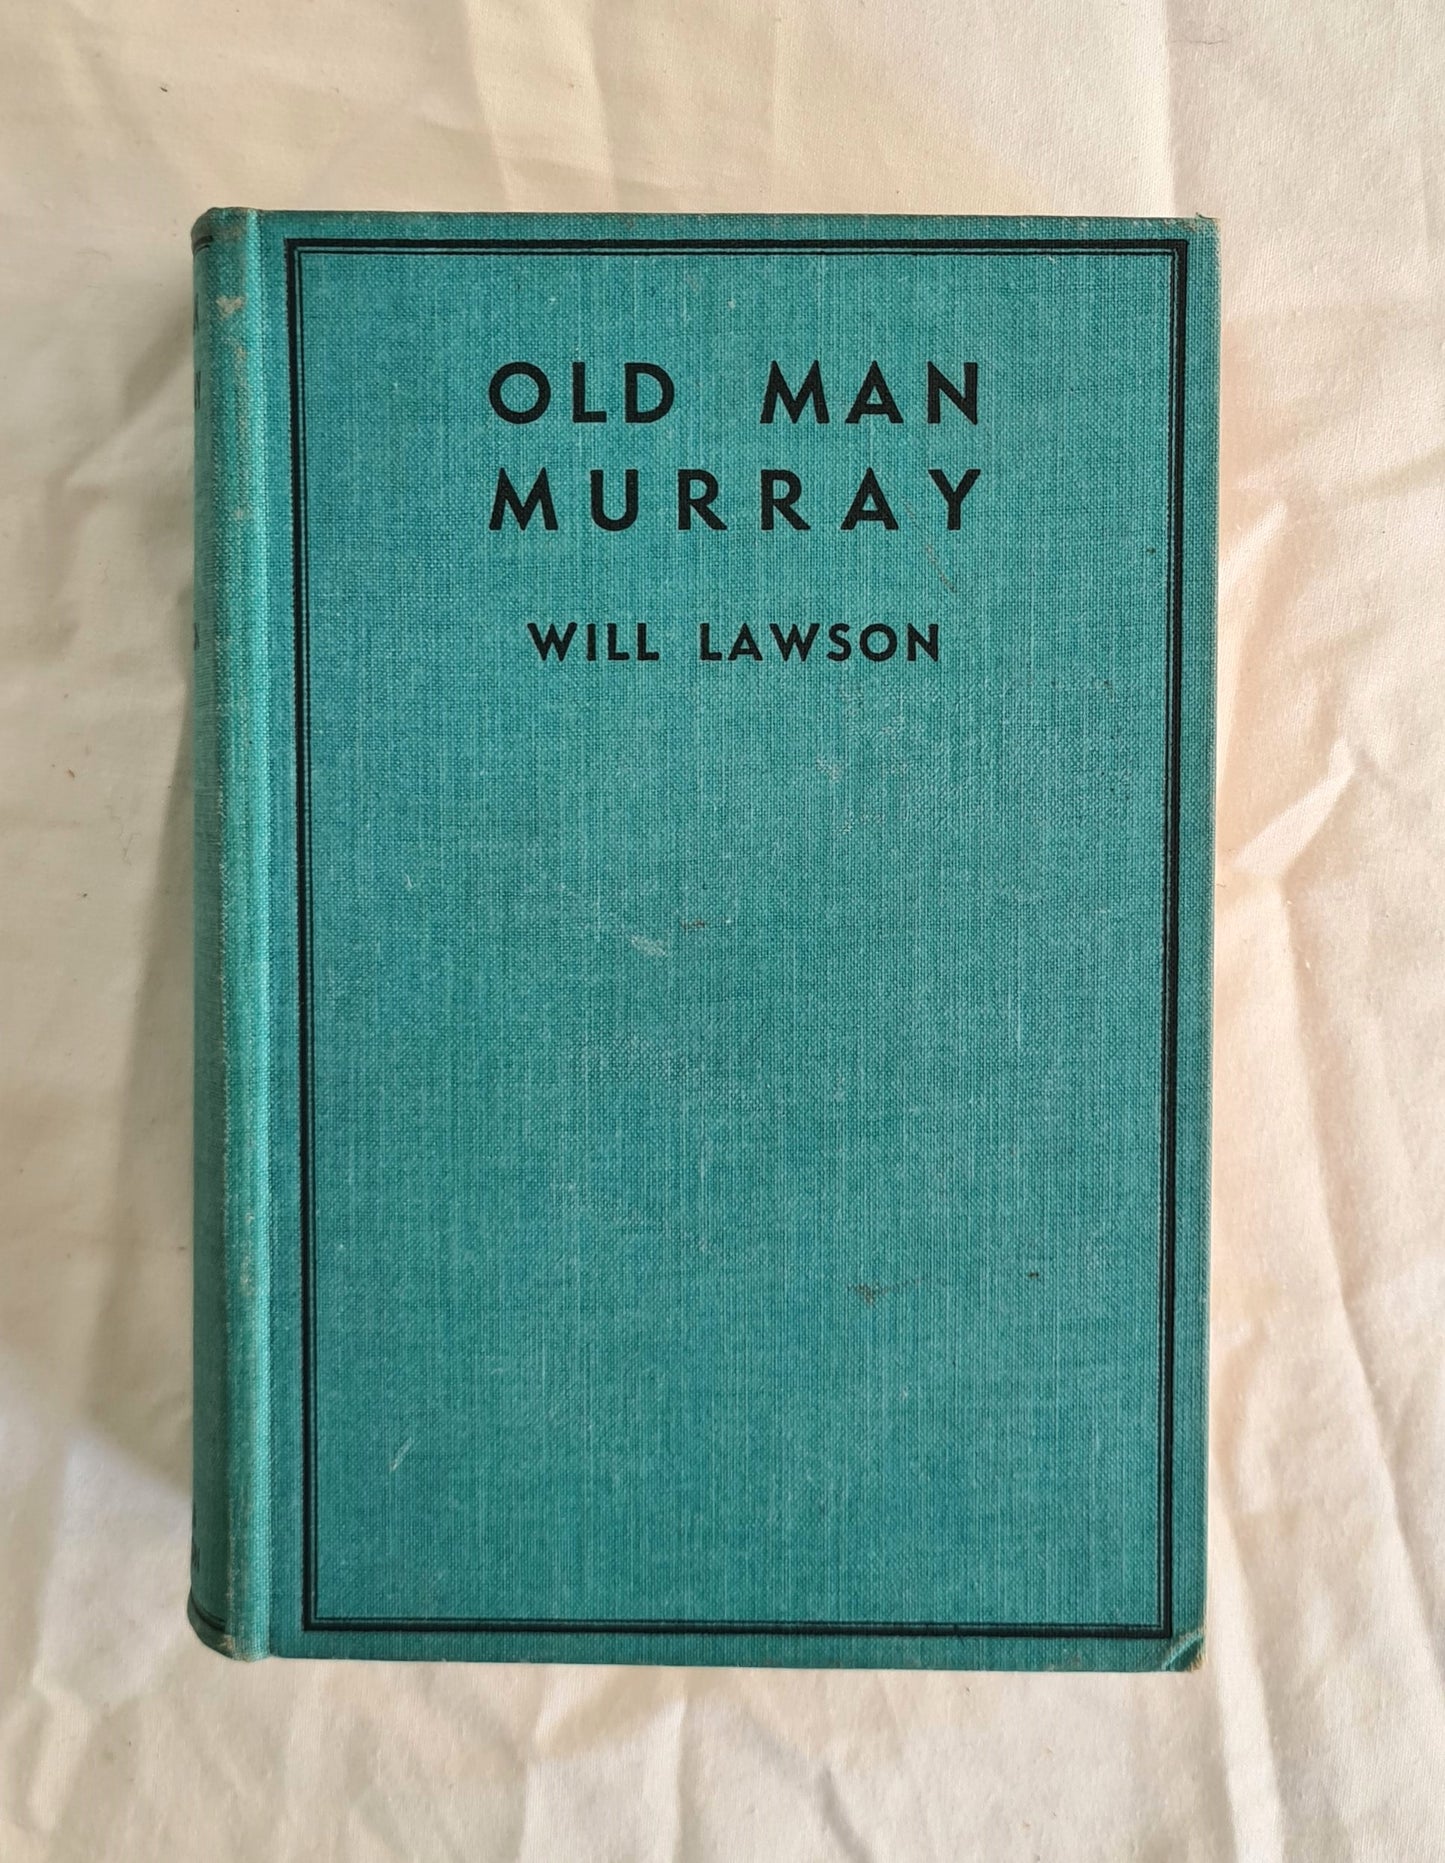 Old Man Murray by Will Lawson